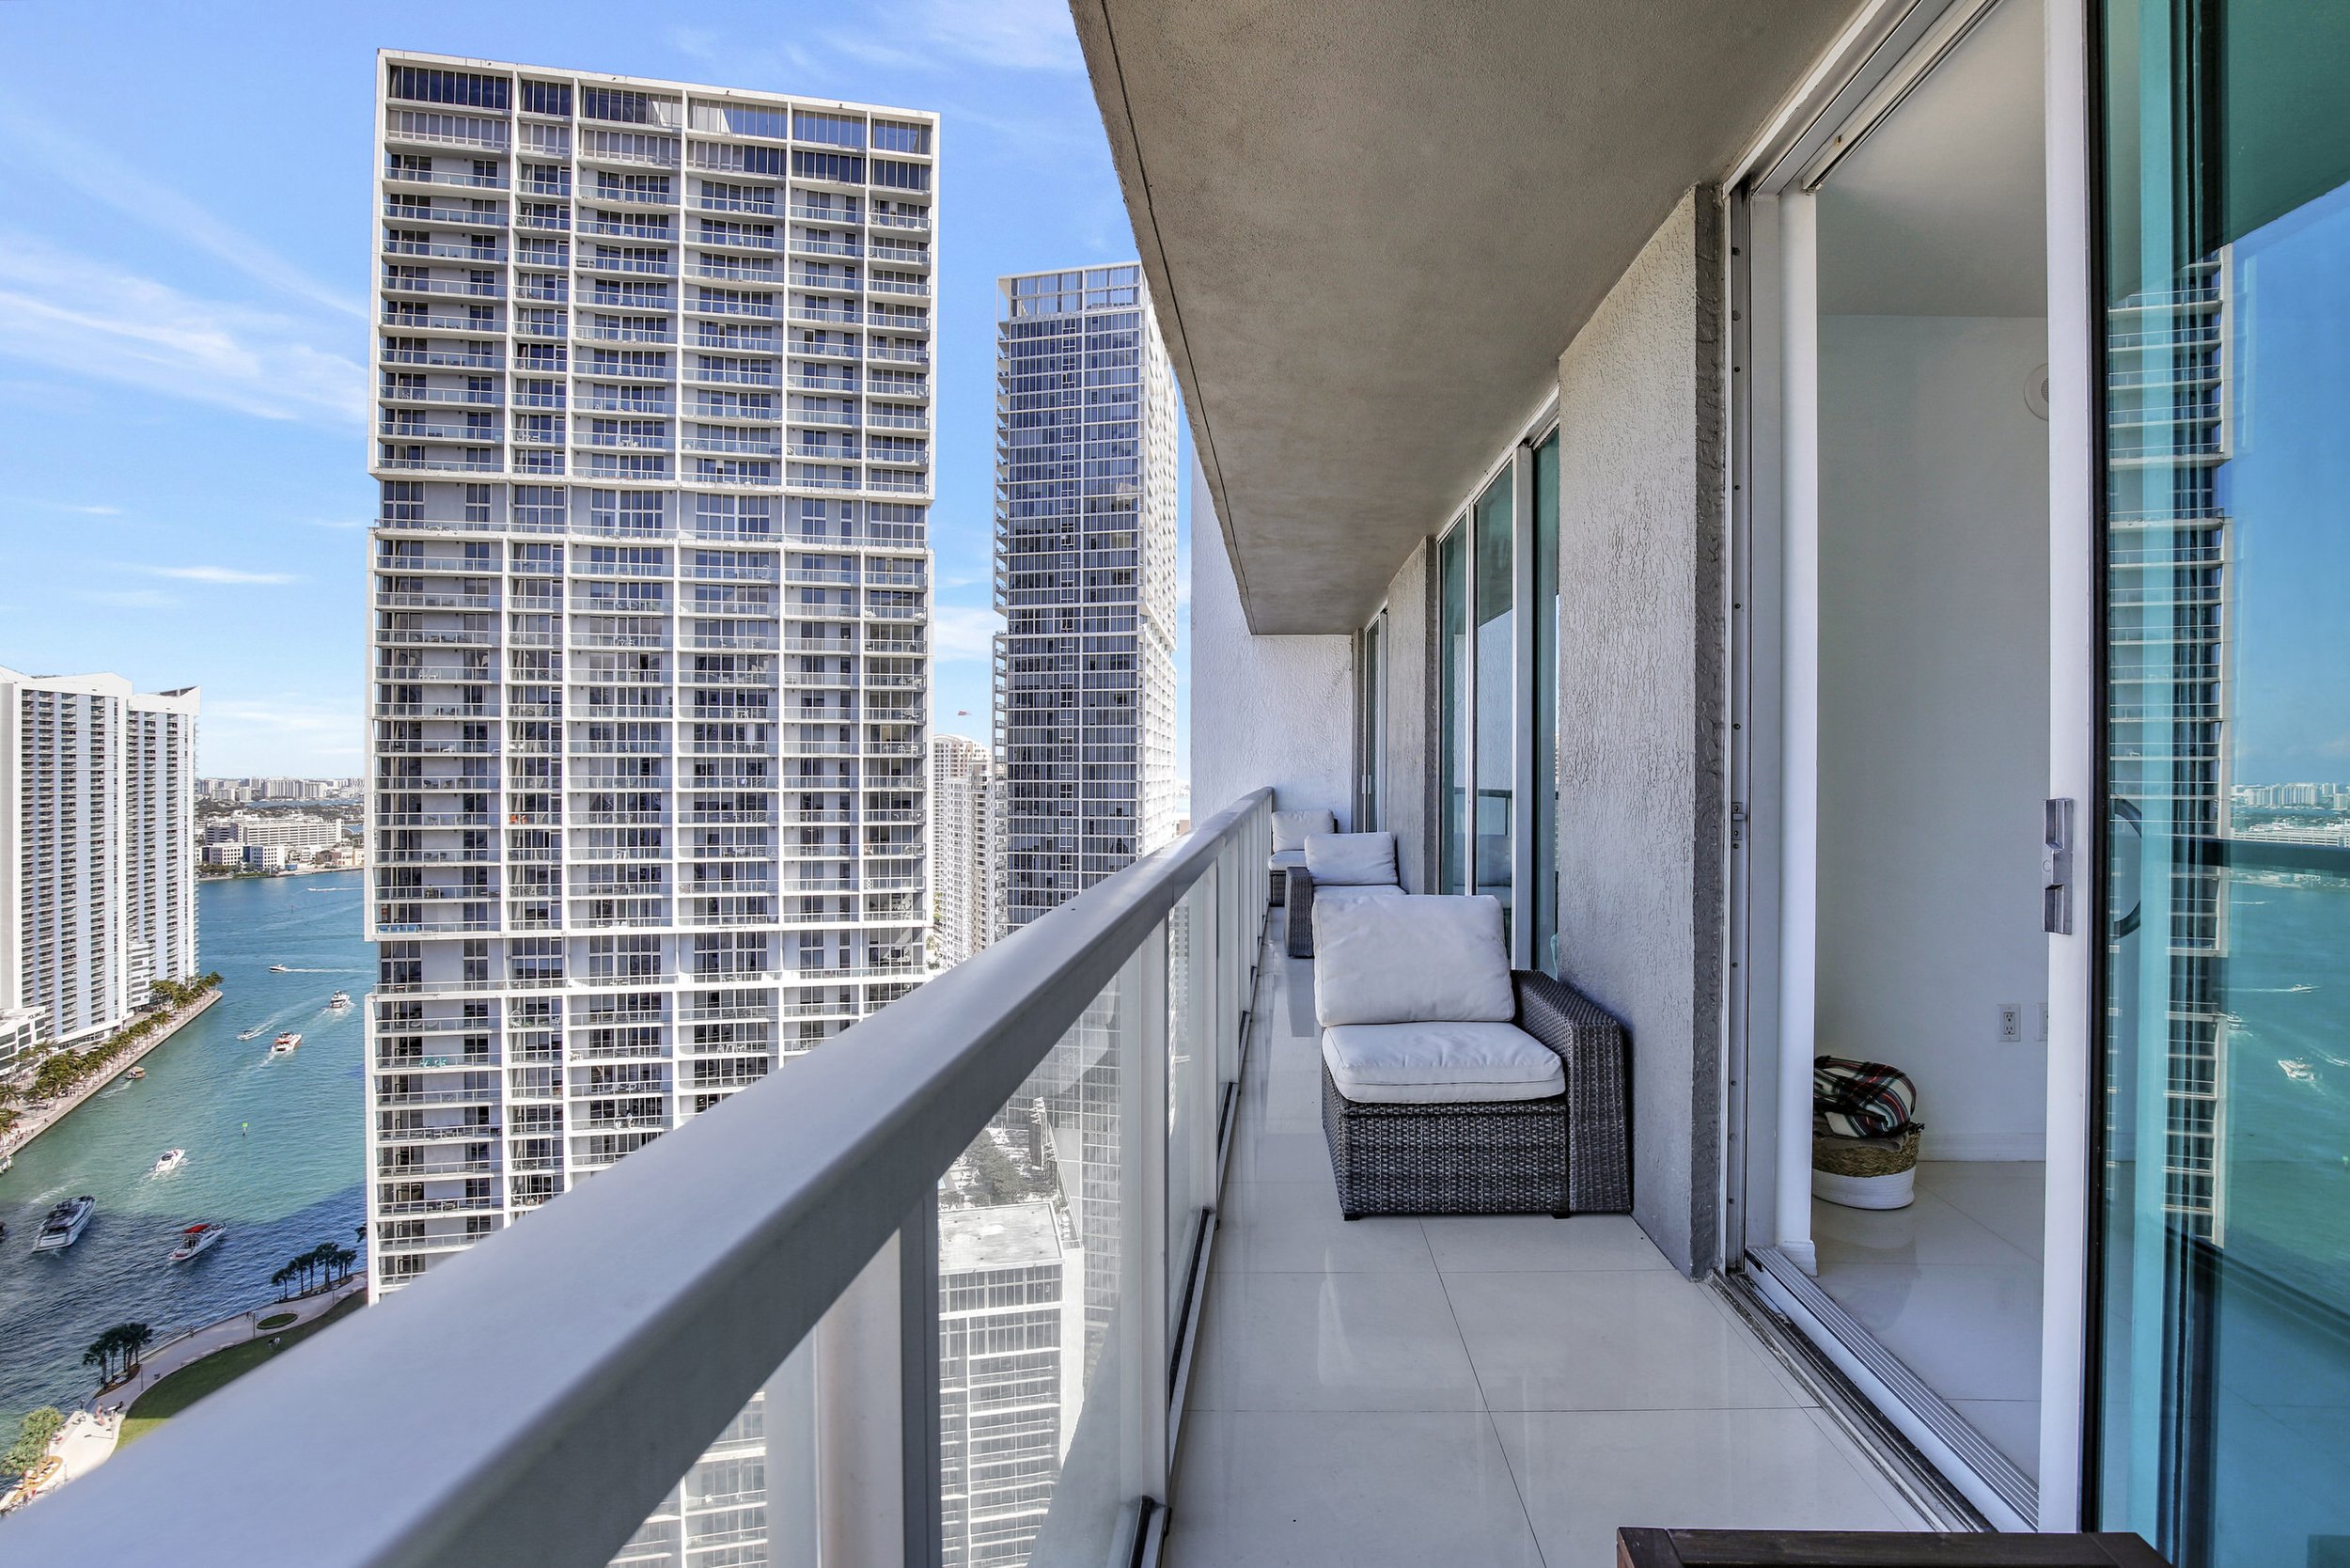 Check Out This Two-Bedroom Condo For Under $900K In Brickell 6.jpg